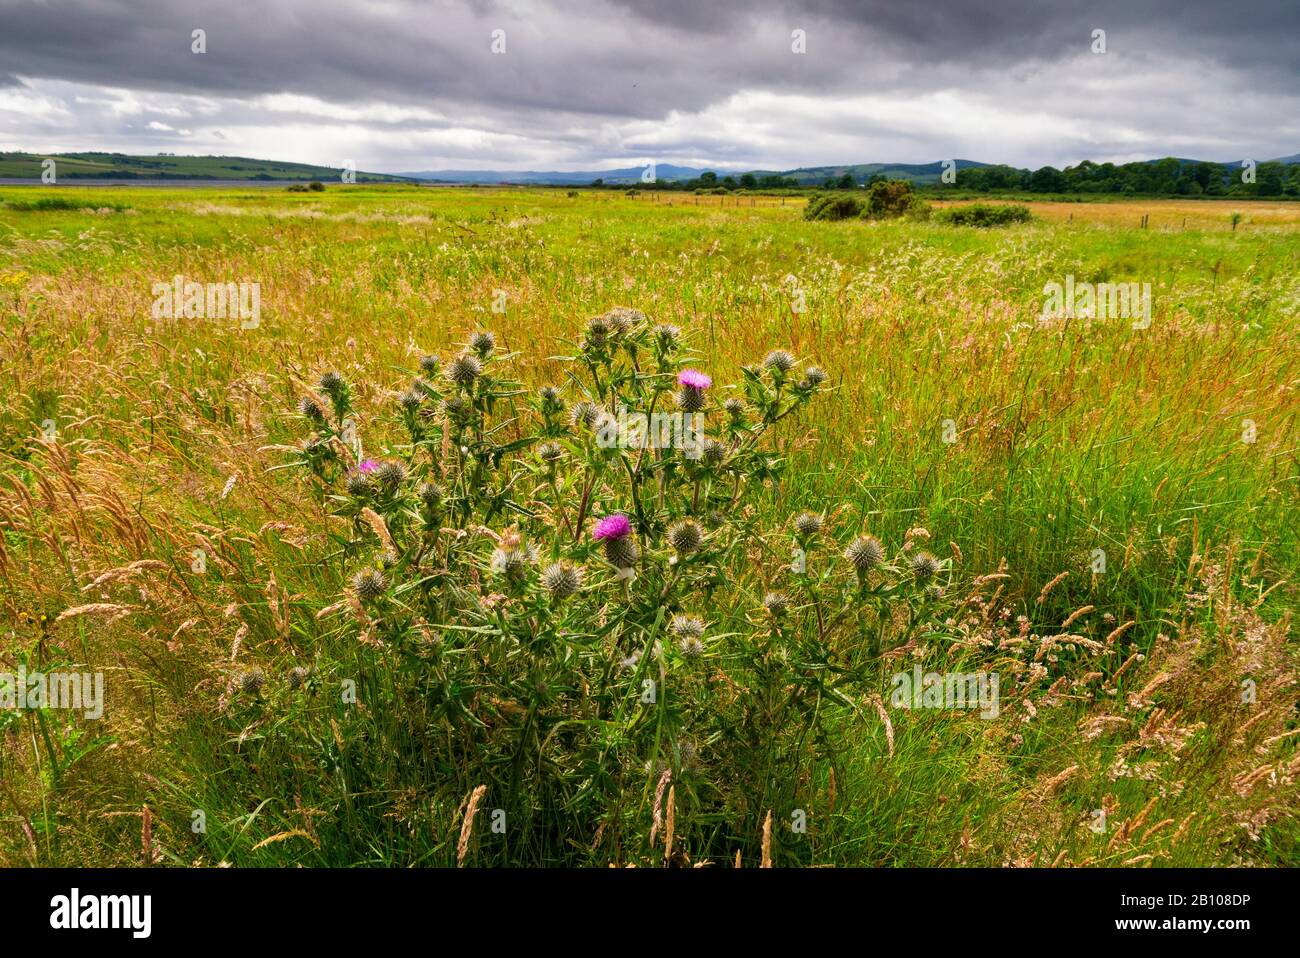 Scots Thistle plant ( Onopordum acanthium ) in the foreground of this landscape from near the Cromarty Firth Scotland UK Stock Photo